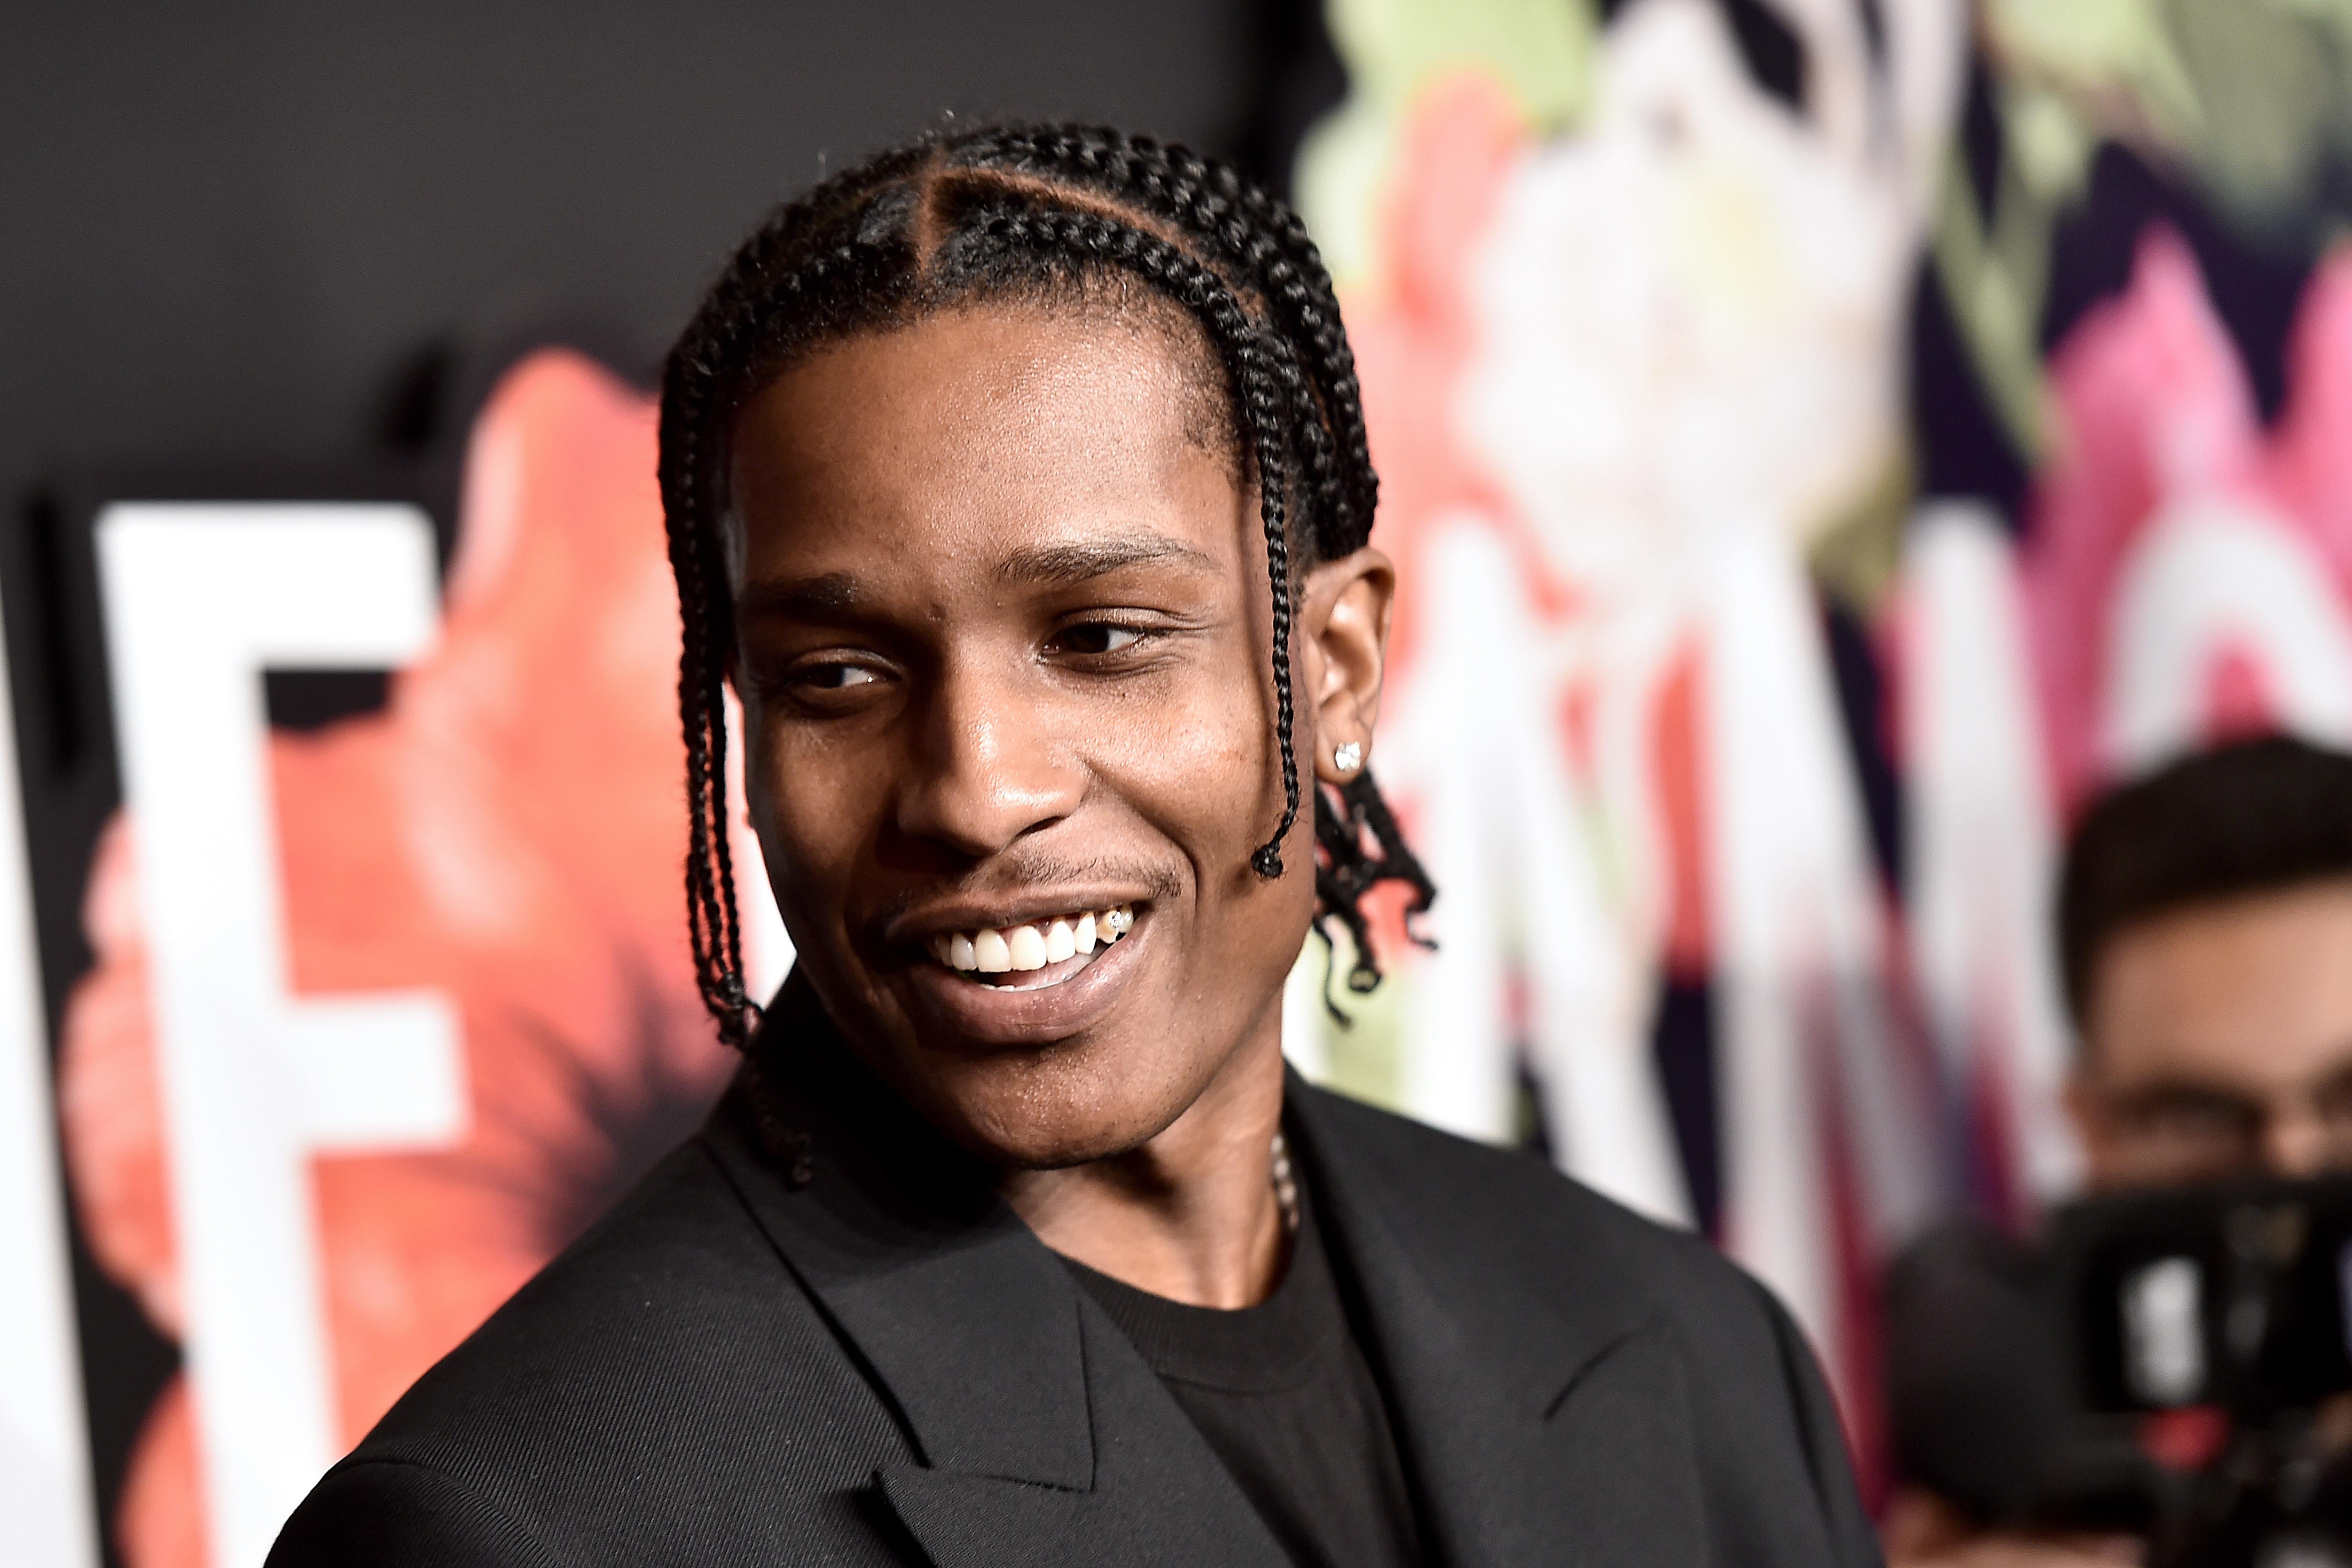 A$AP Rocky was mentioned multiple times during Wednesday's impeachment hearing. 